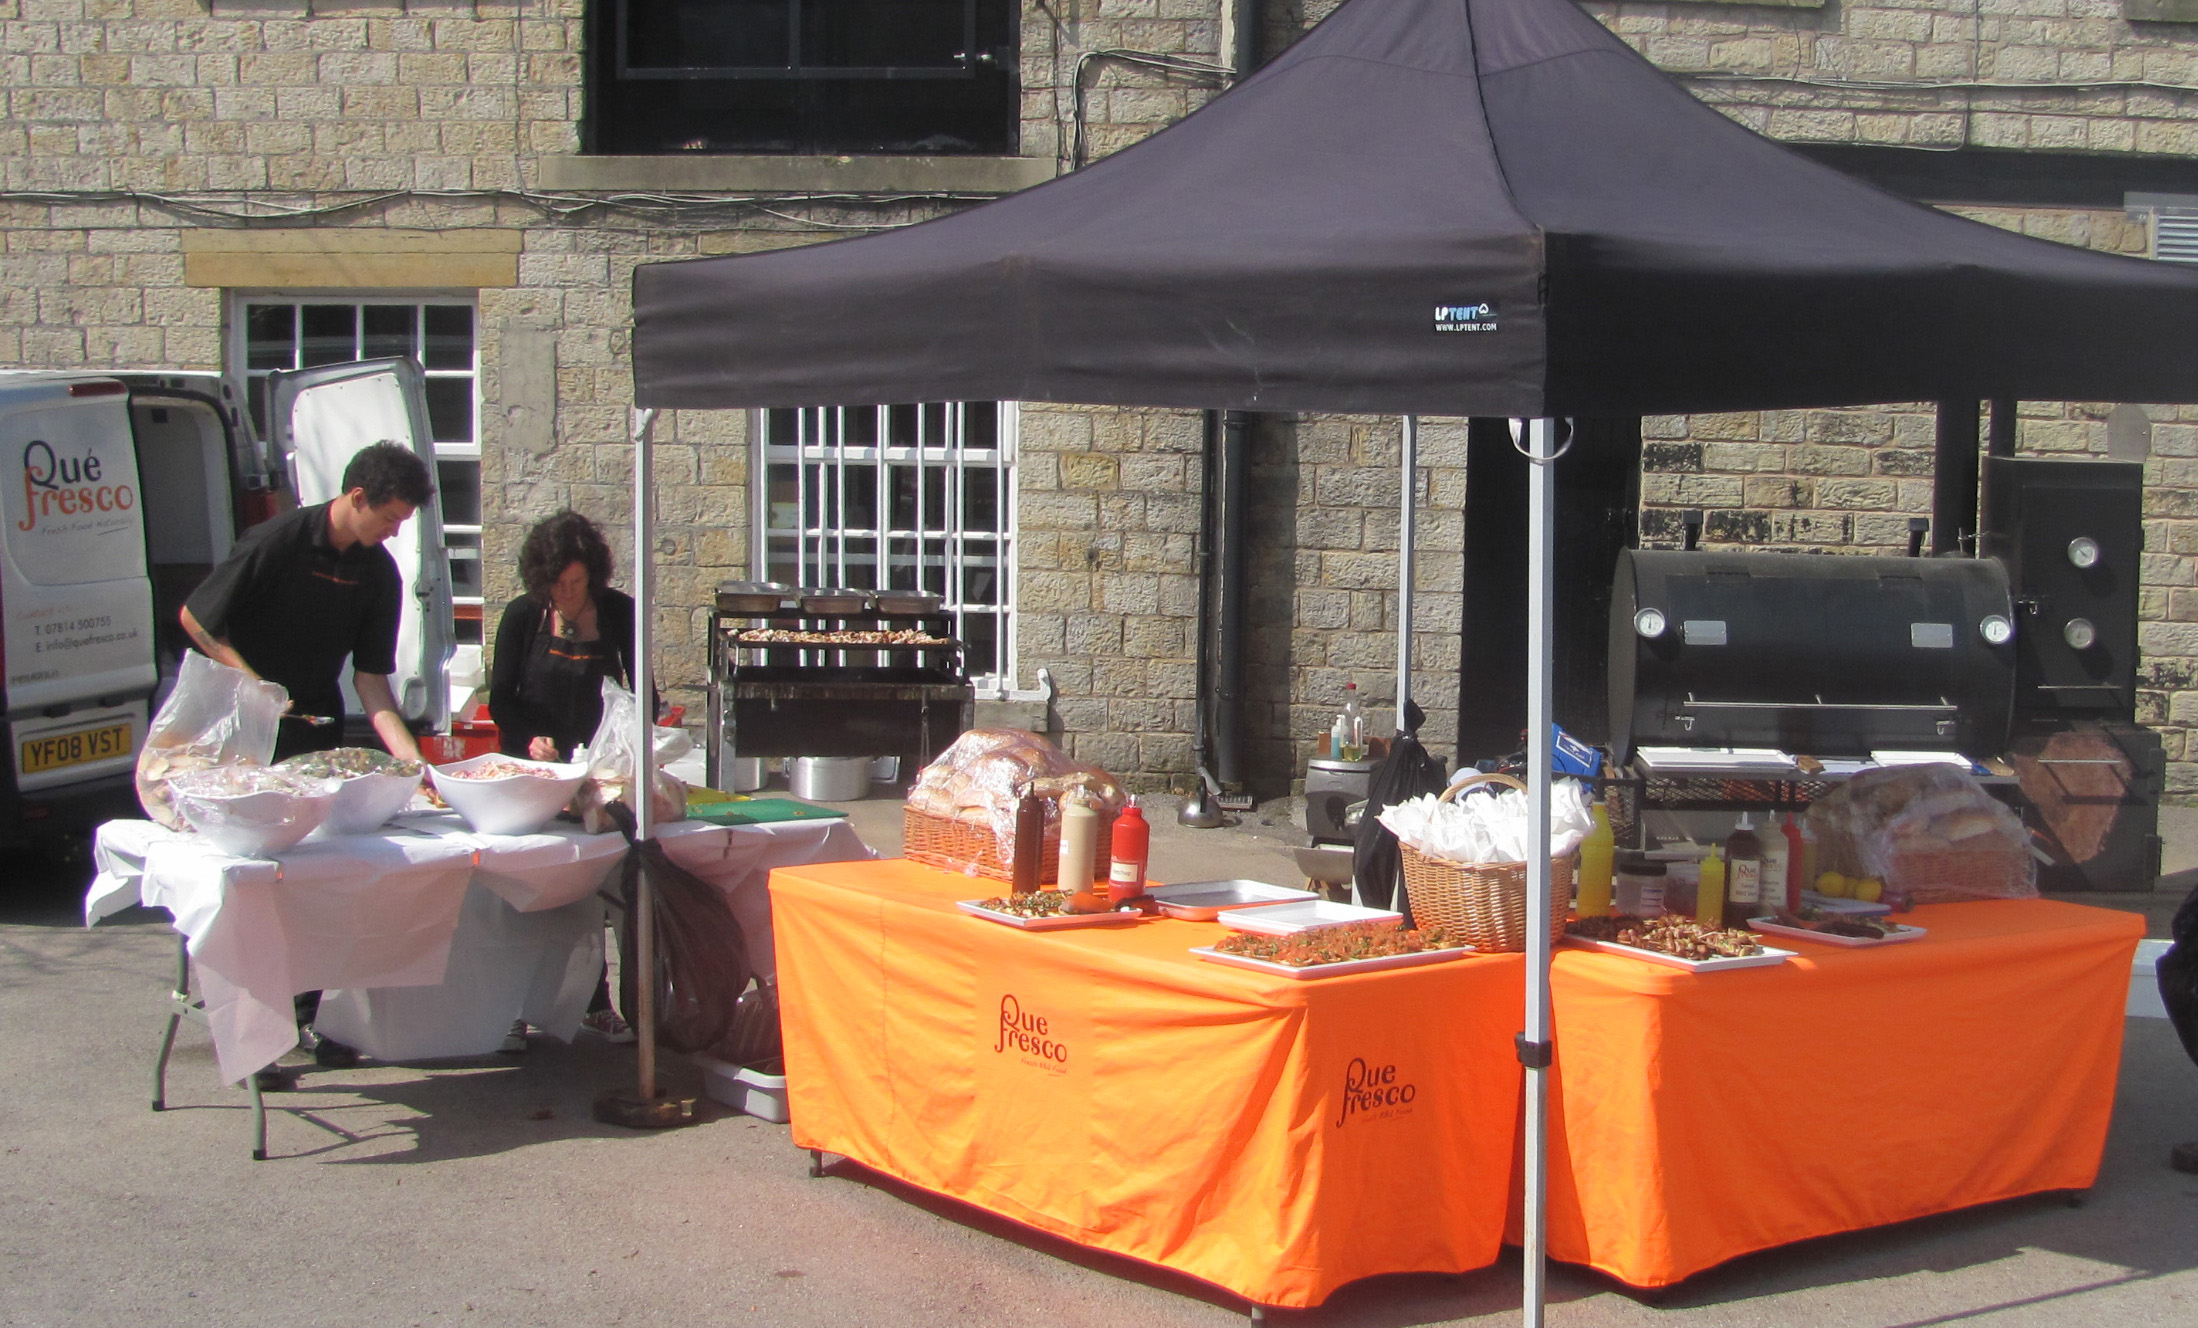 The BBQ Catering Lancashire set up